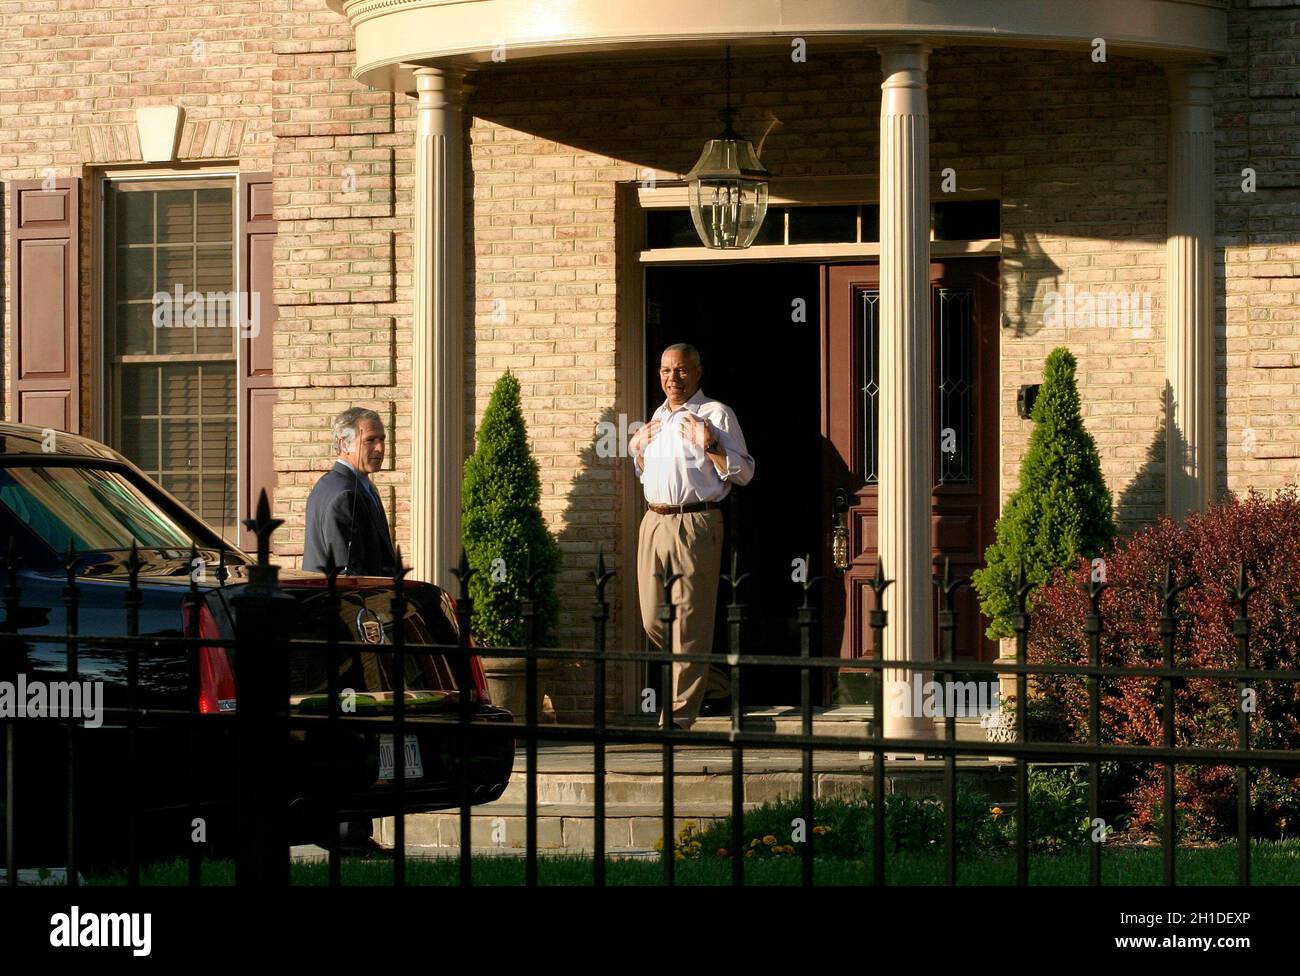 McLean, VA - May 31, 2005 -- On short notice, United States President George W. Bush and first lady Laura Bush went to the home of former Secretary of State Colin L. Powell and his wife Alma. Powell was dressed in a light-colored dress shirt and khakis (no jacket or tie). The President embraced him and, turning to wave at the cameras, removed his suit jacket and grinned. The first lady wore a light-colored pantsuit. The dinner was private, with just the two couples. Credit: Martin H. Simon - Pool via CNP Stock Photo